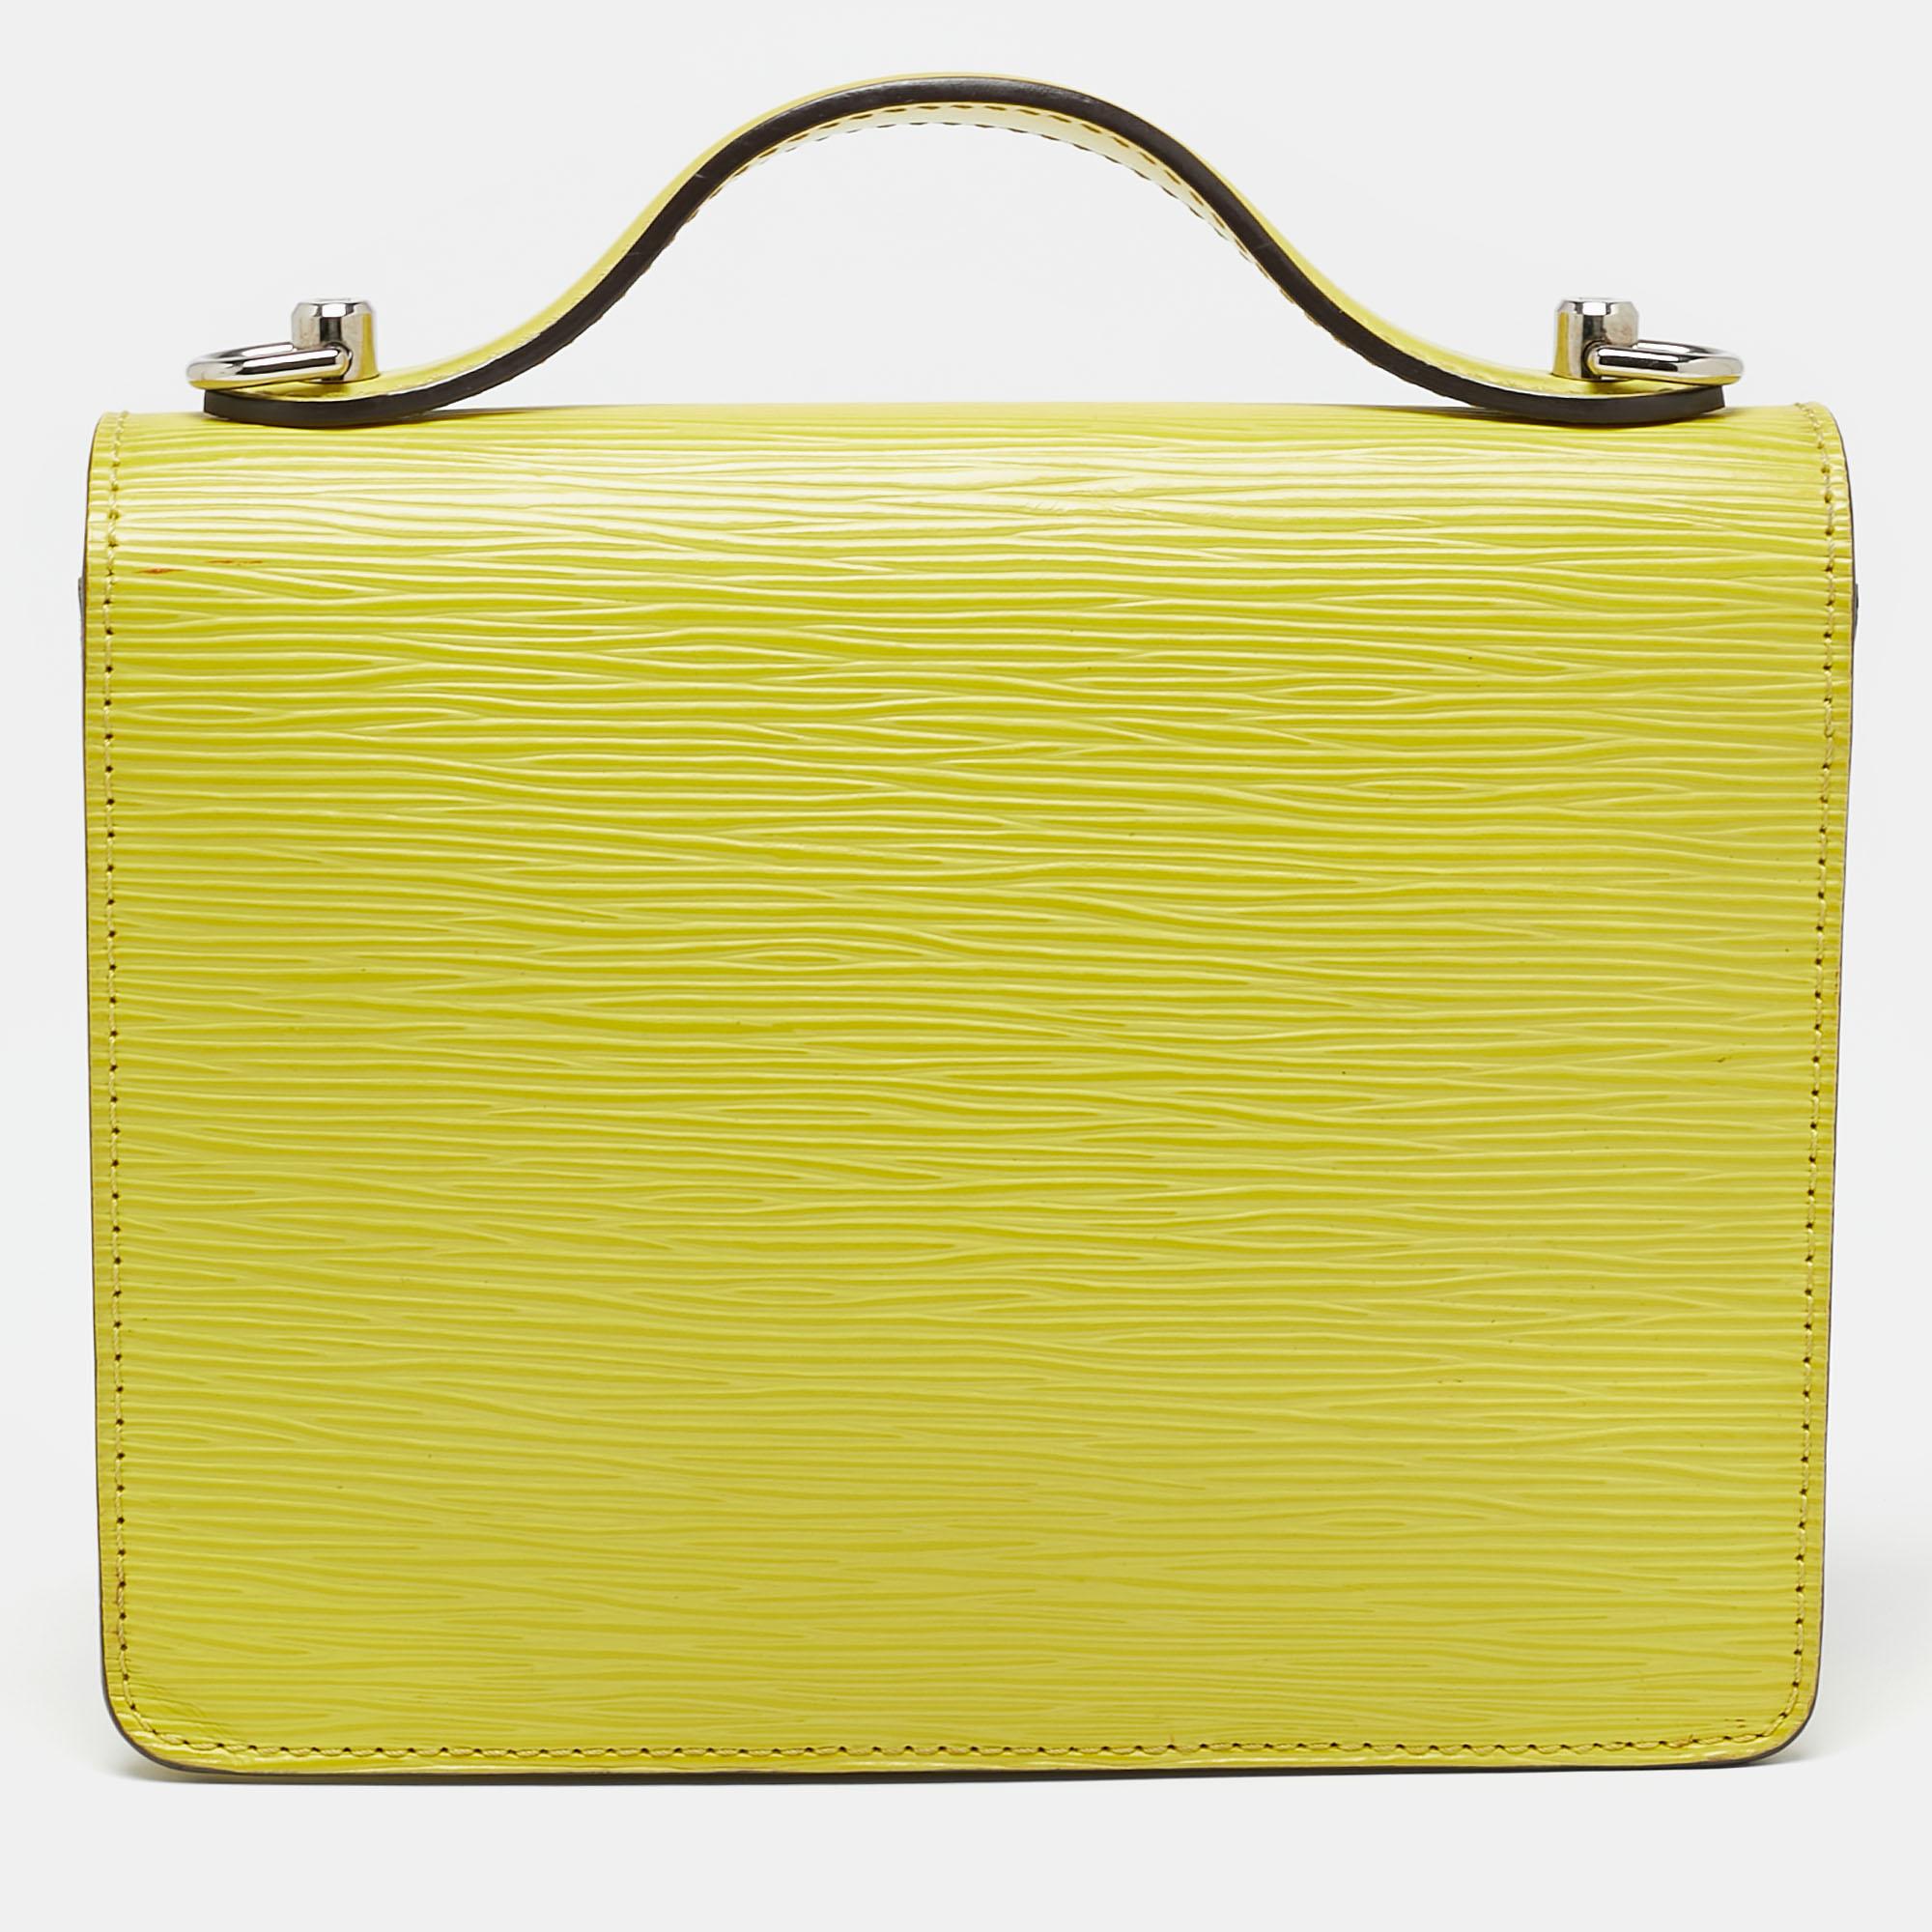 Showcasing a beautiful citron color, this Louis Vuitton bag is a bundle of perfection. It is designed with Epi leather and silver-tone hardware and has a front flap that reveals a spacious interior for your essentials. Its top handle is coupled with